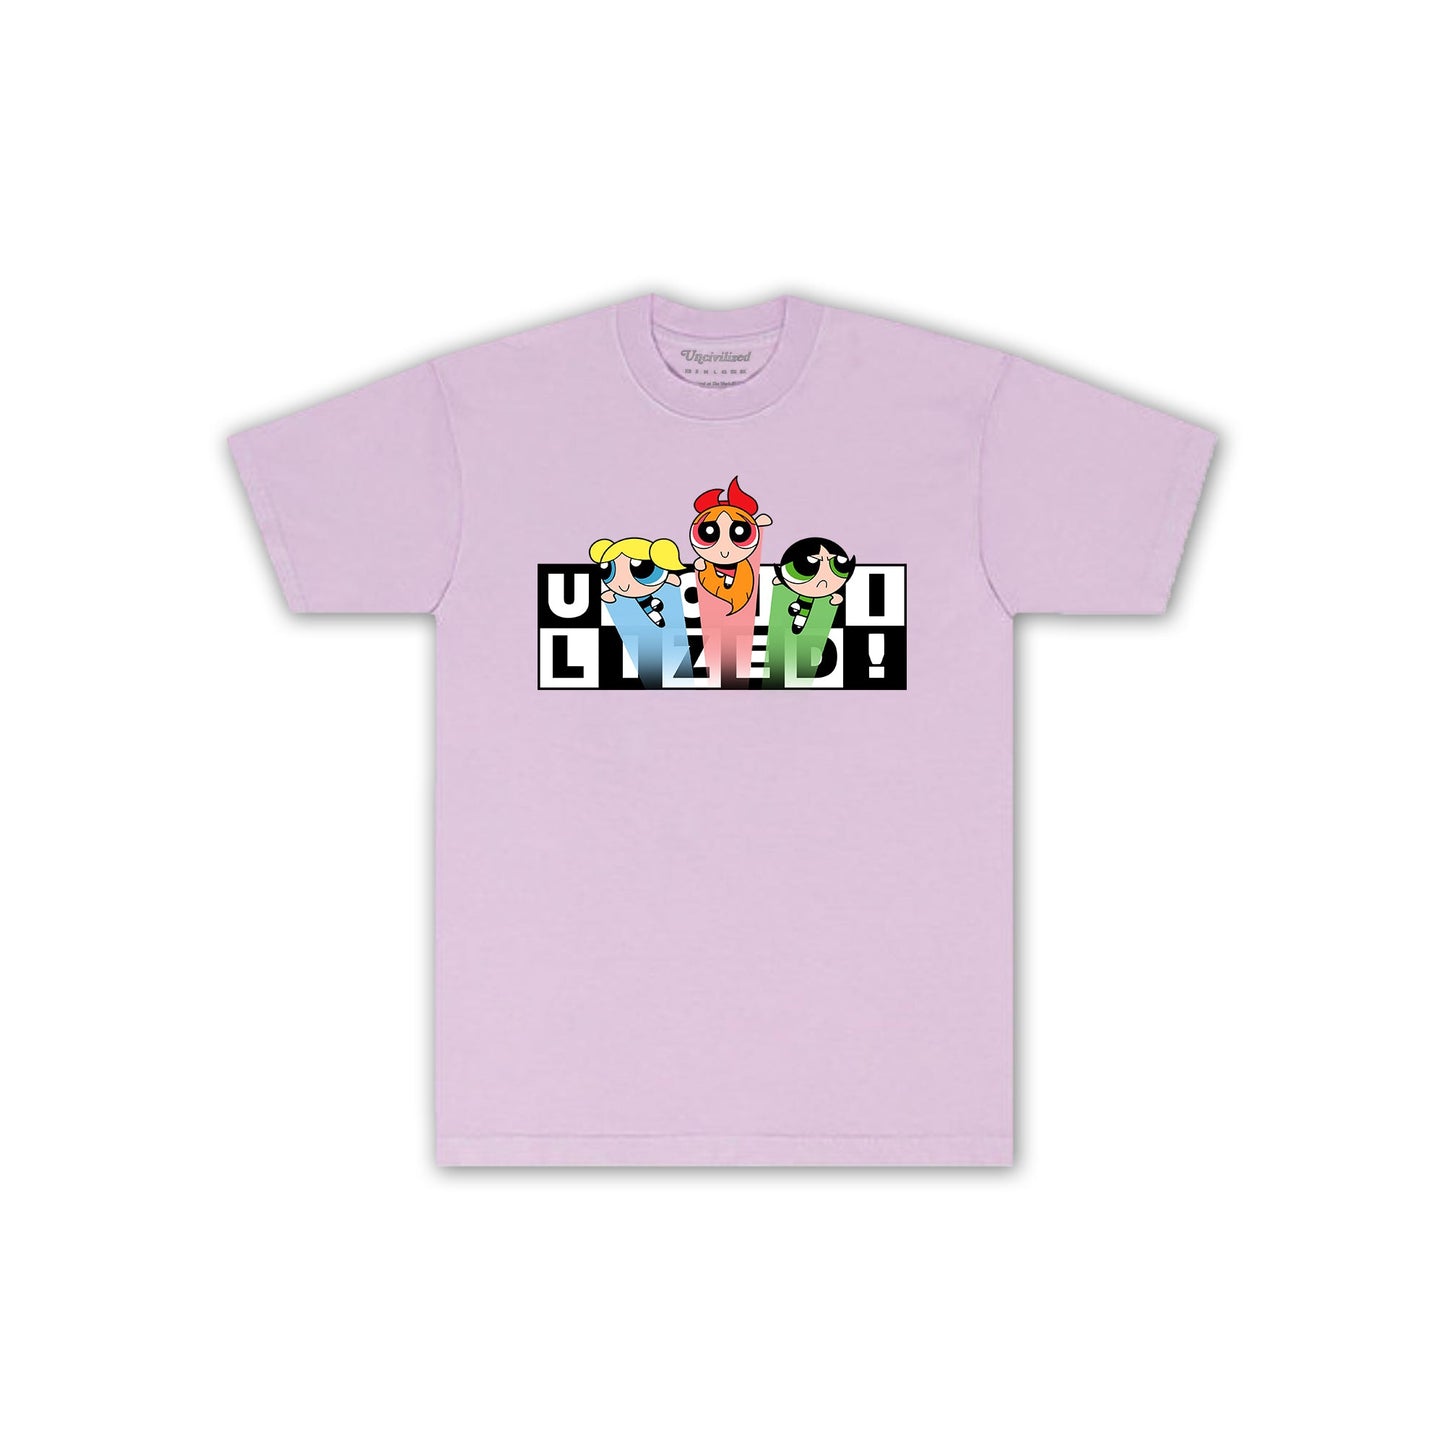 EARLY ACCESS: UNCIVILIZED "POWERPUFF" T-SHIRT